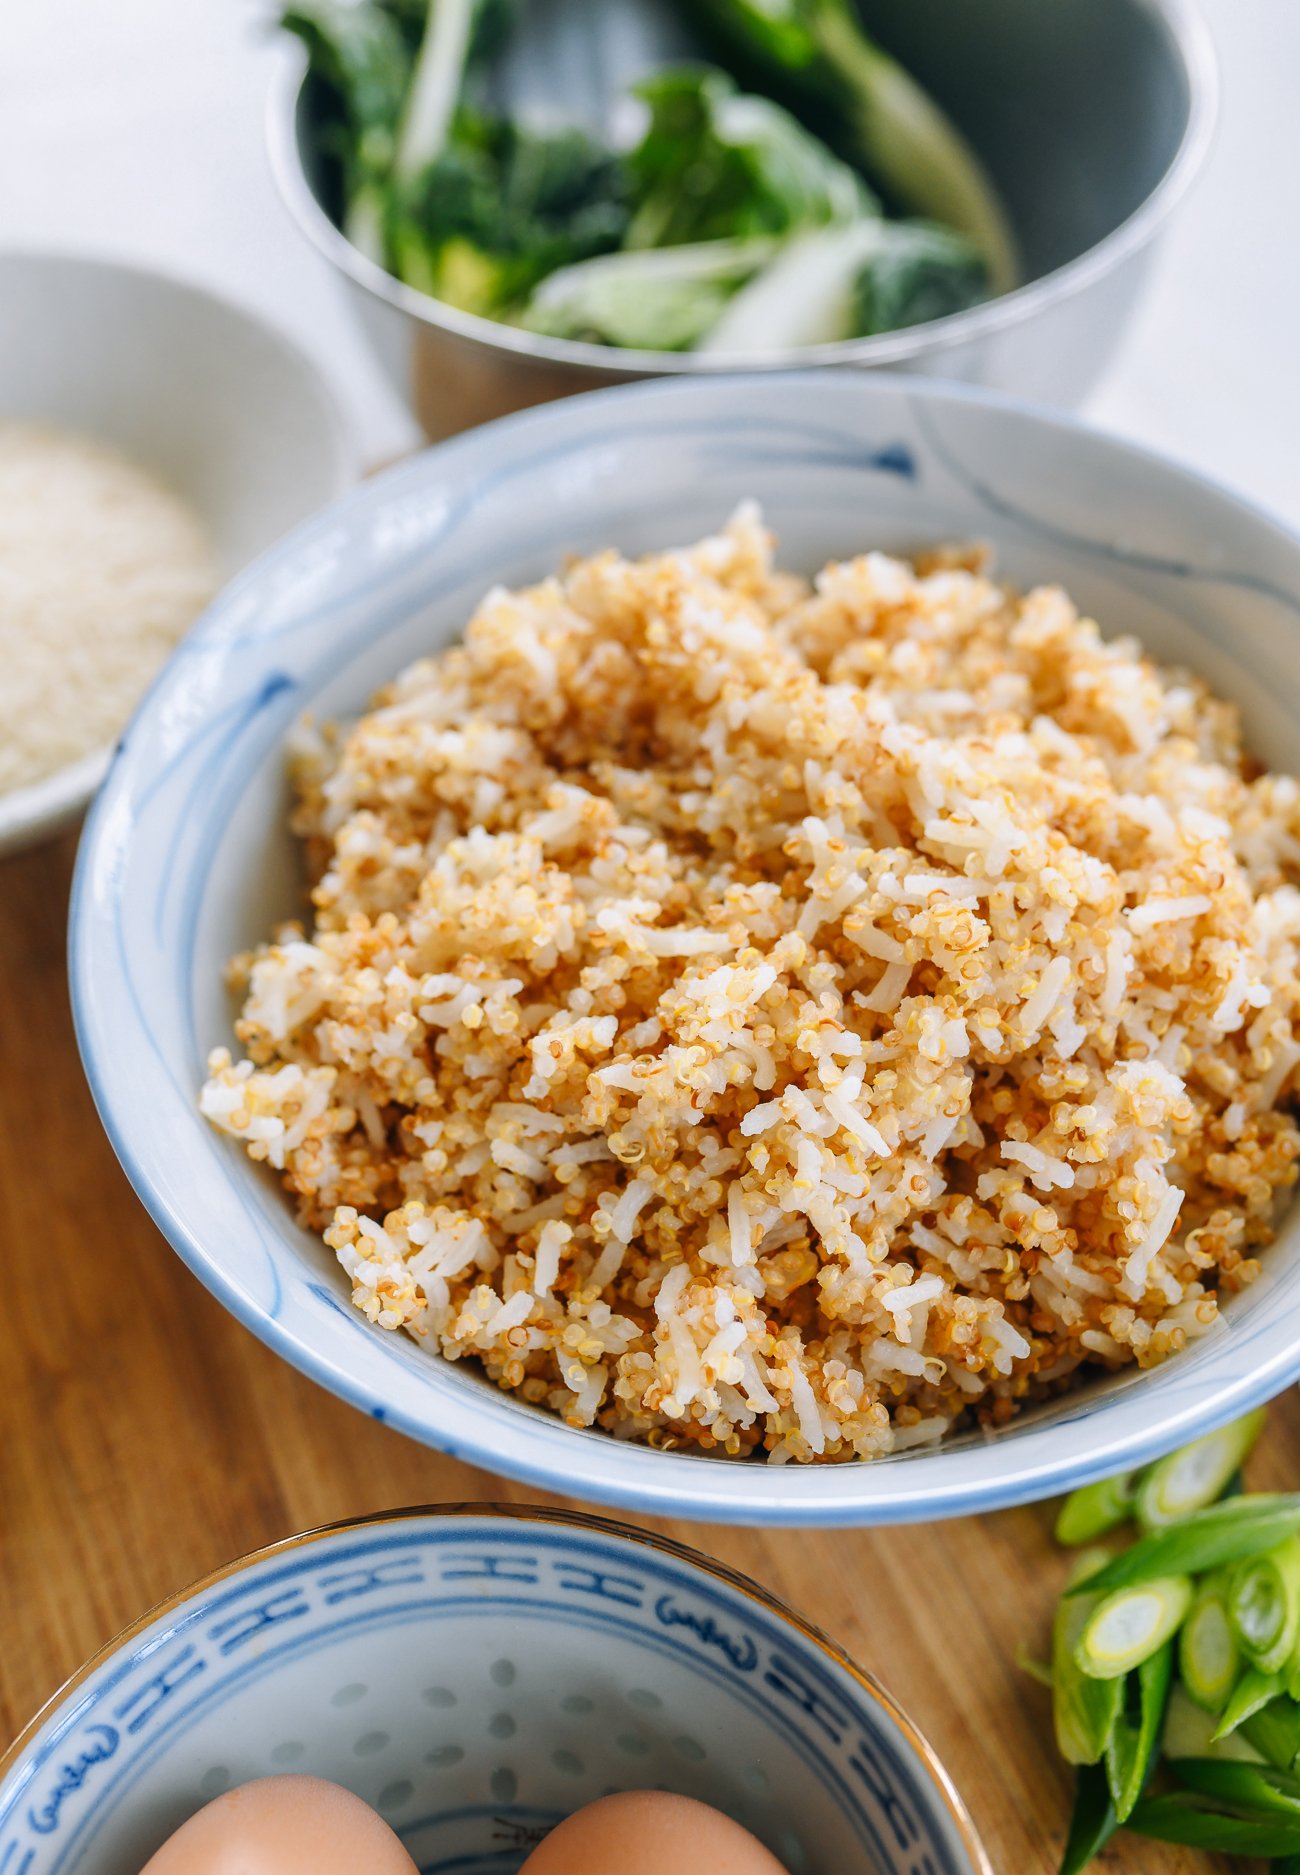 Cooked quinoa rice blend